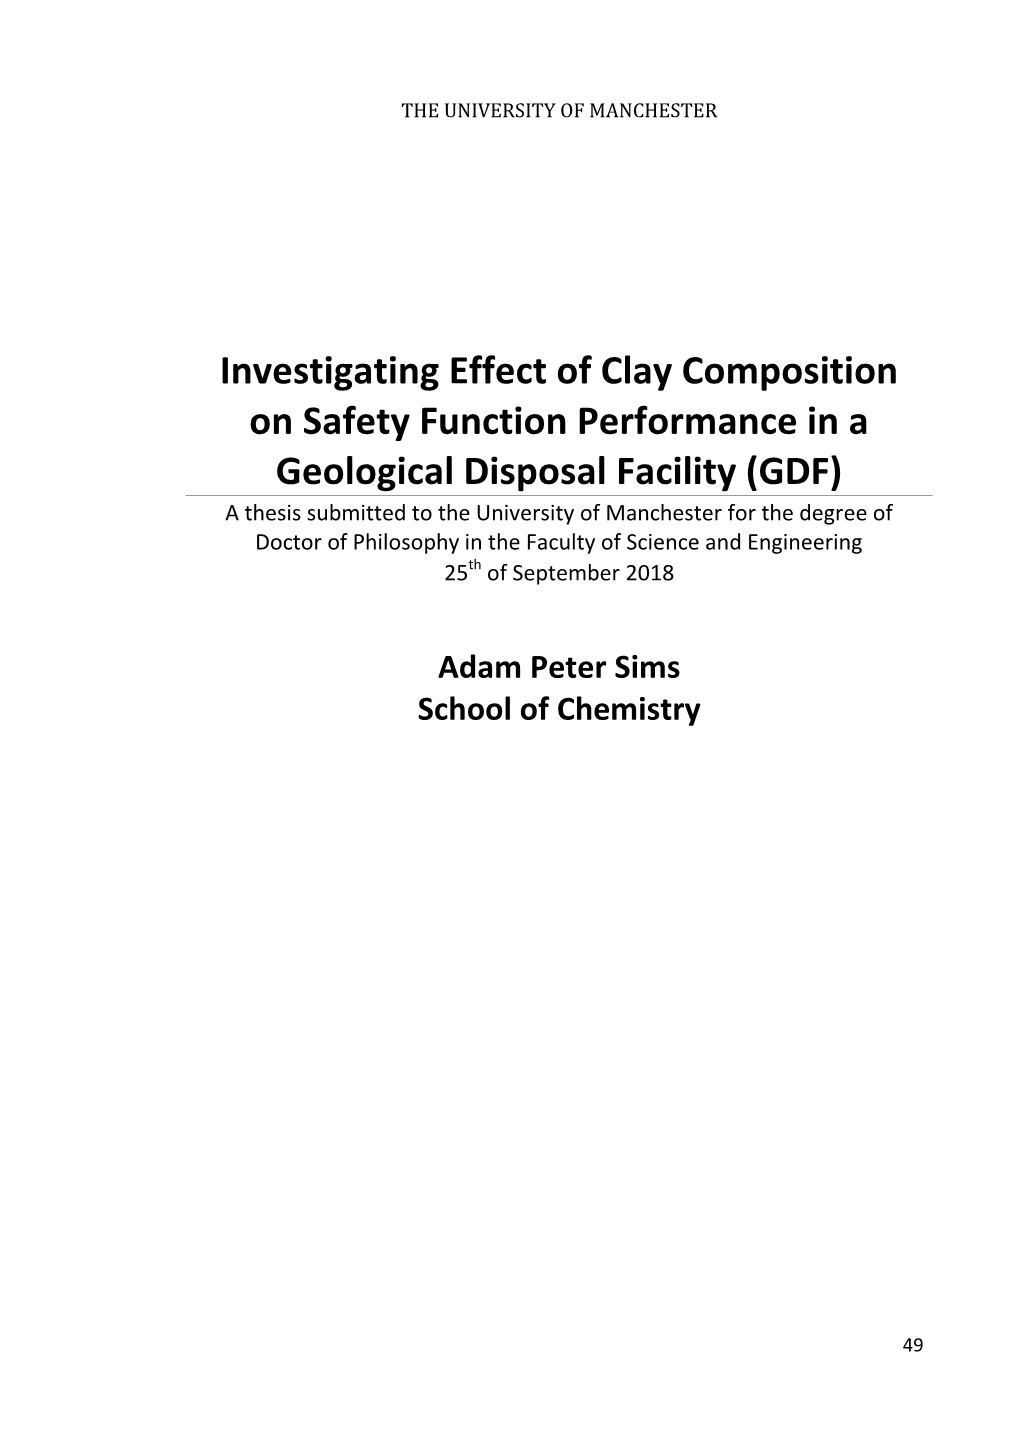 Investigating Effect of Clay Composition on Safety Function